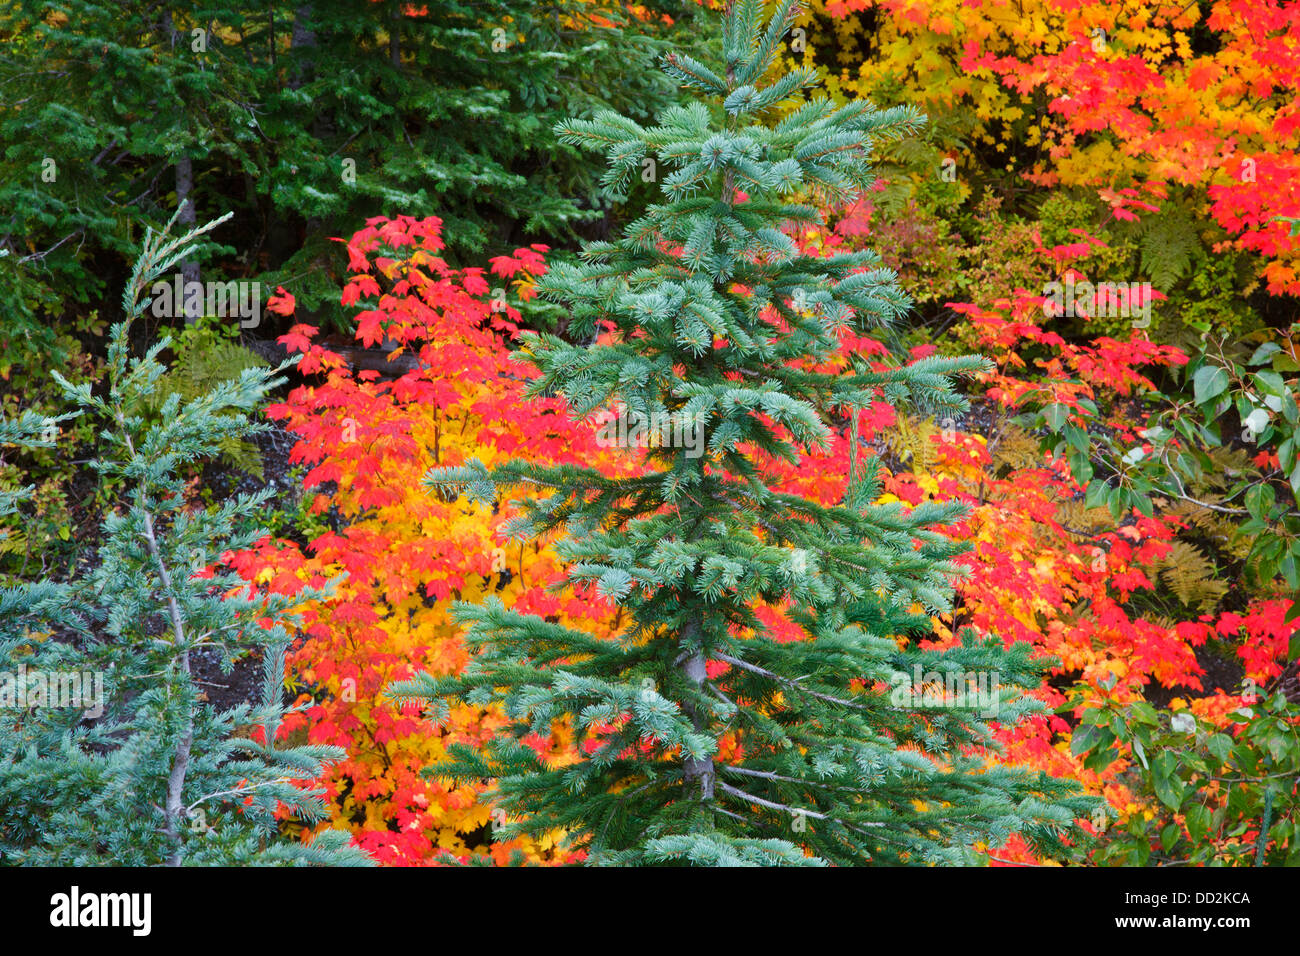 Autumn Coloured Vine Maples In Mt. Hood National Forest; Oregon, United States of America Stock Photo